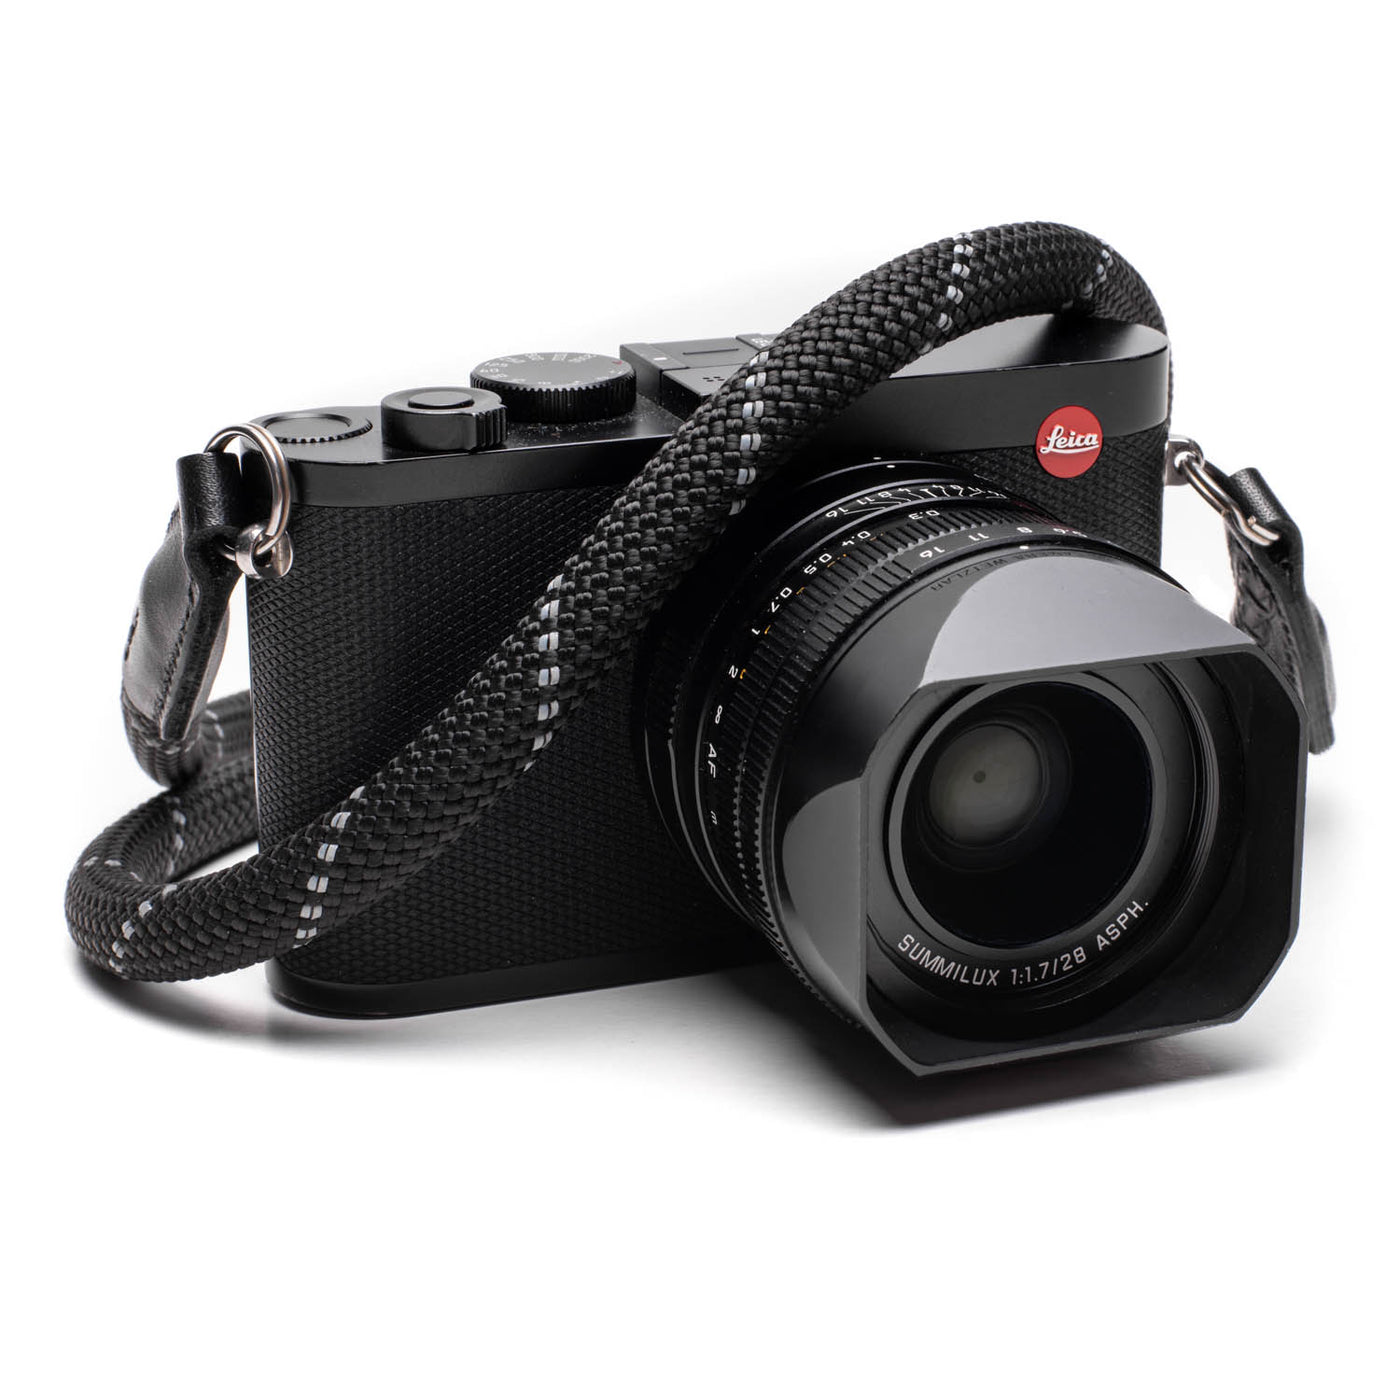 Black Leica camera with a black rope strap 